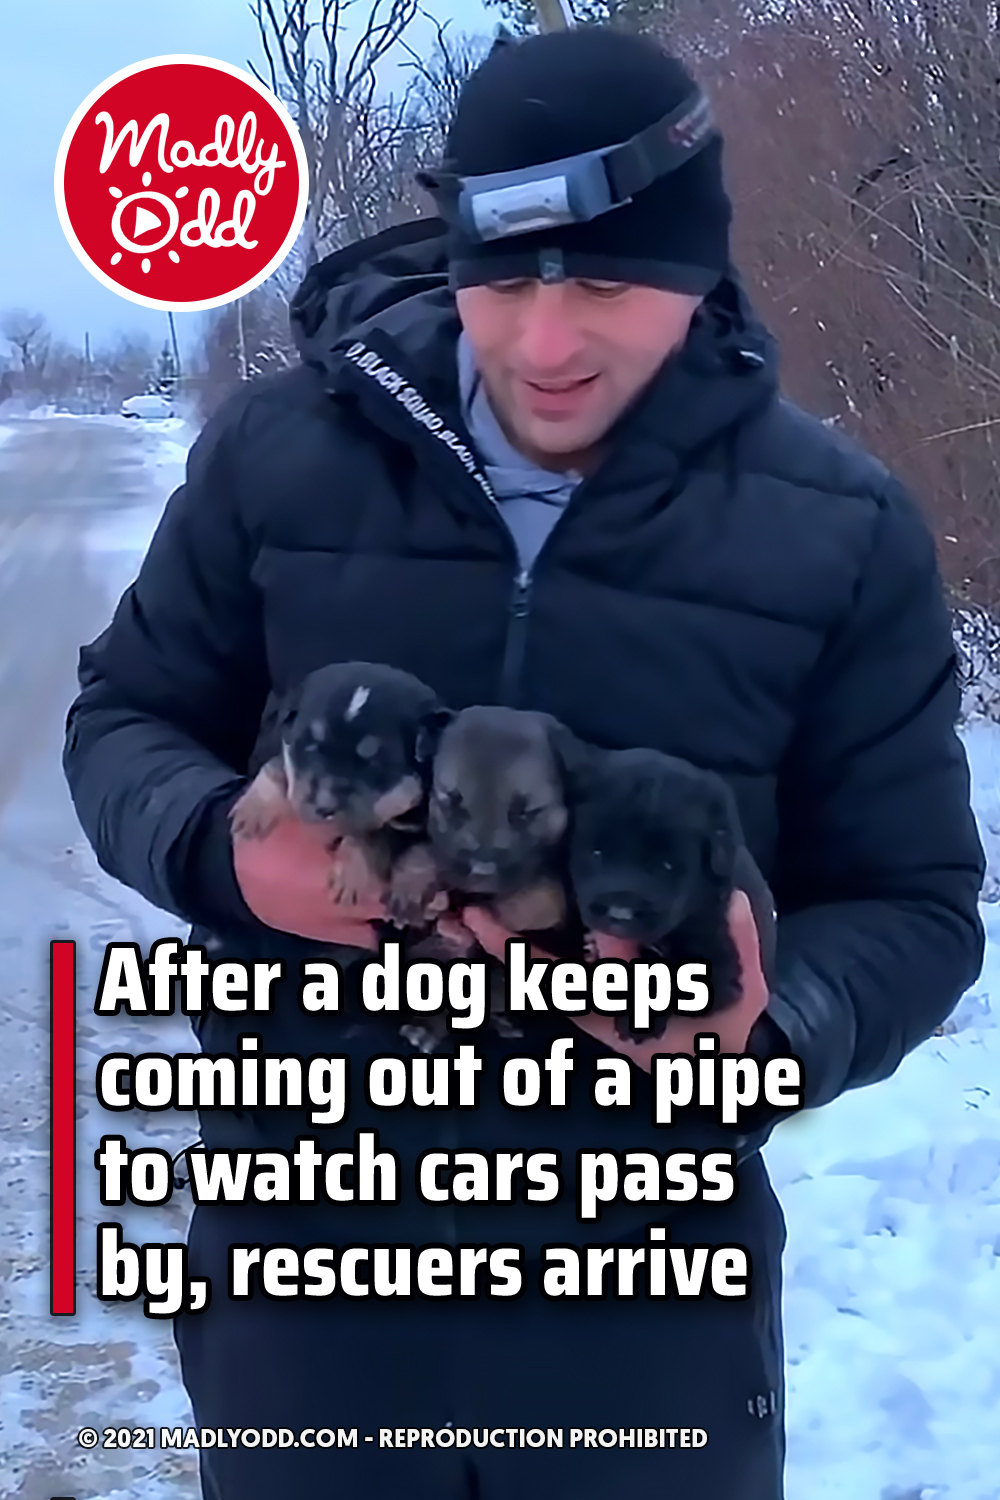 After a dog keeps coming out of a pipe to watch cars pass by, rescuers arrive